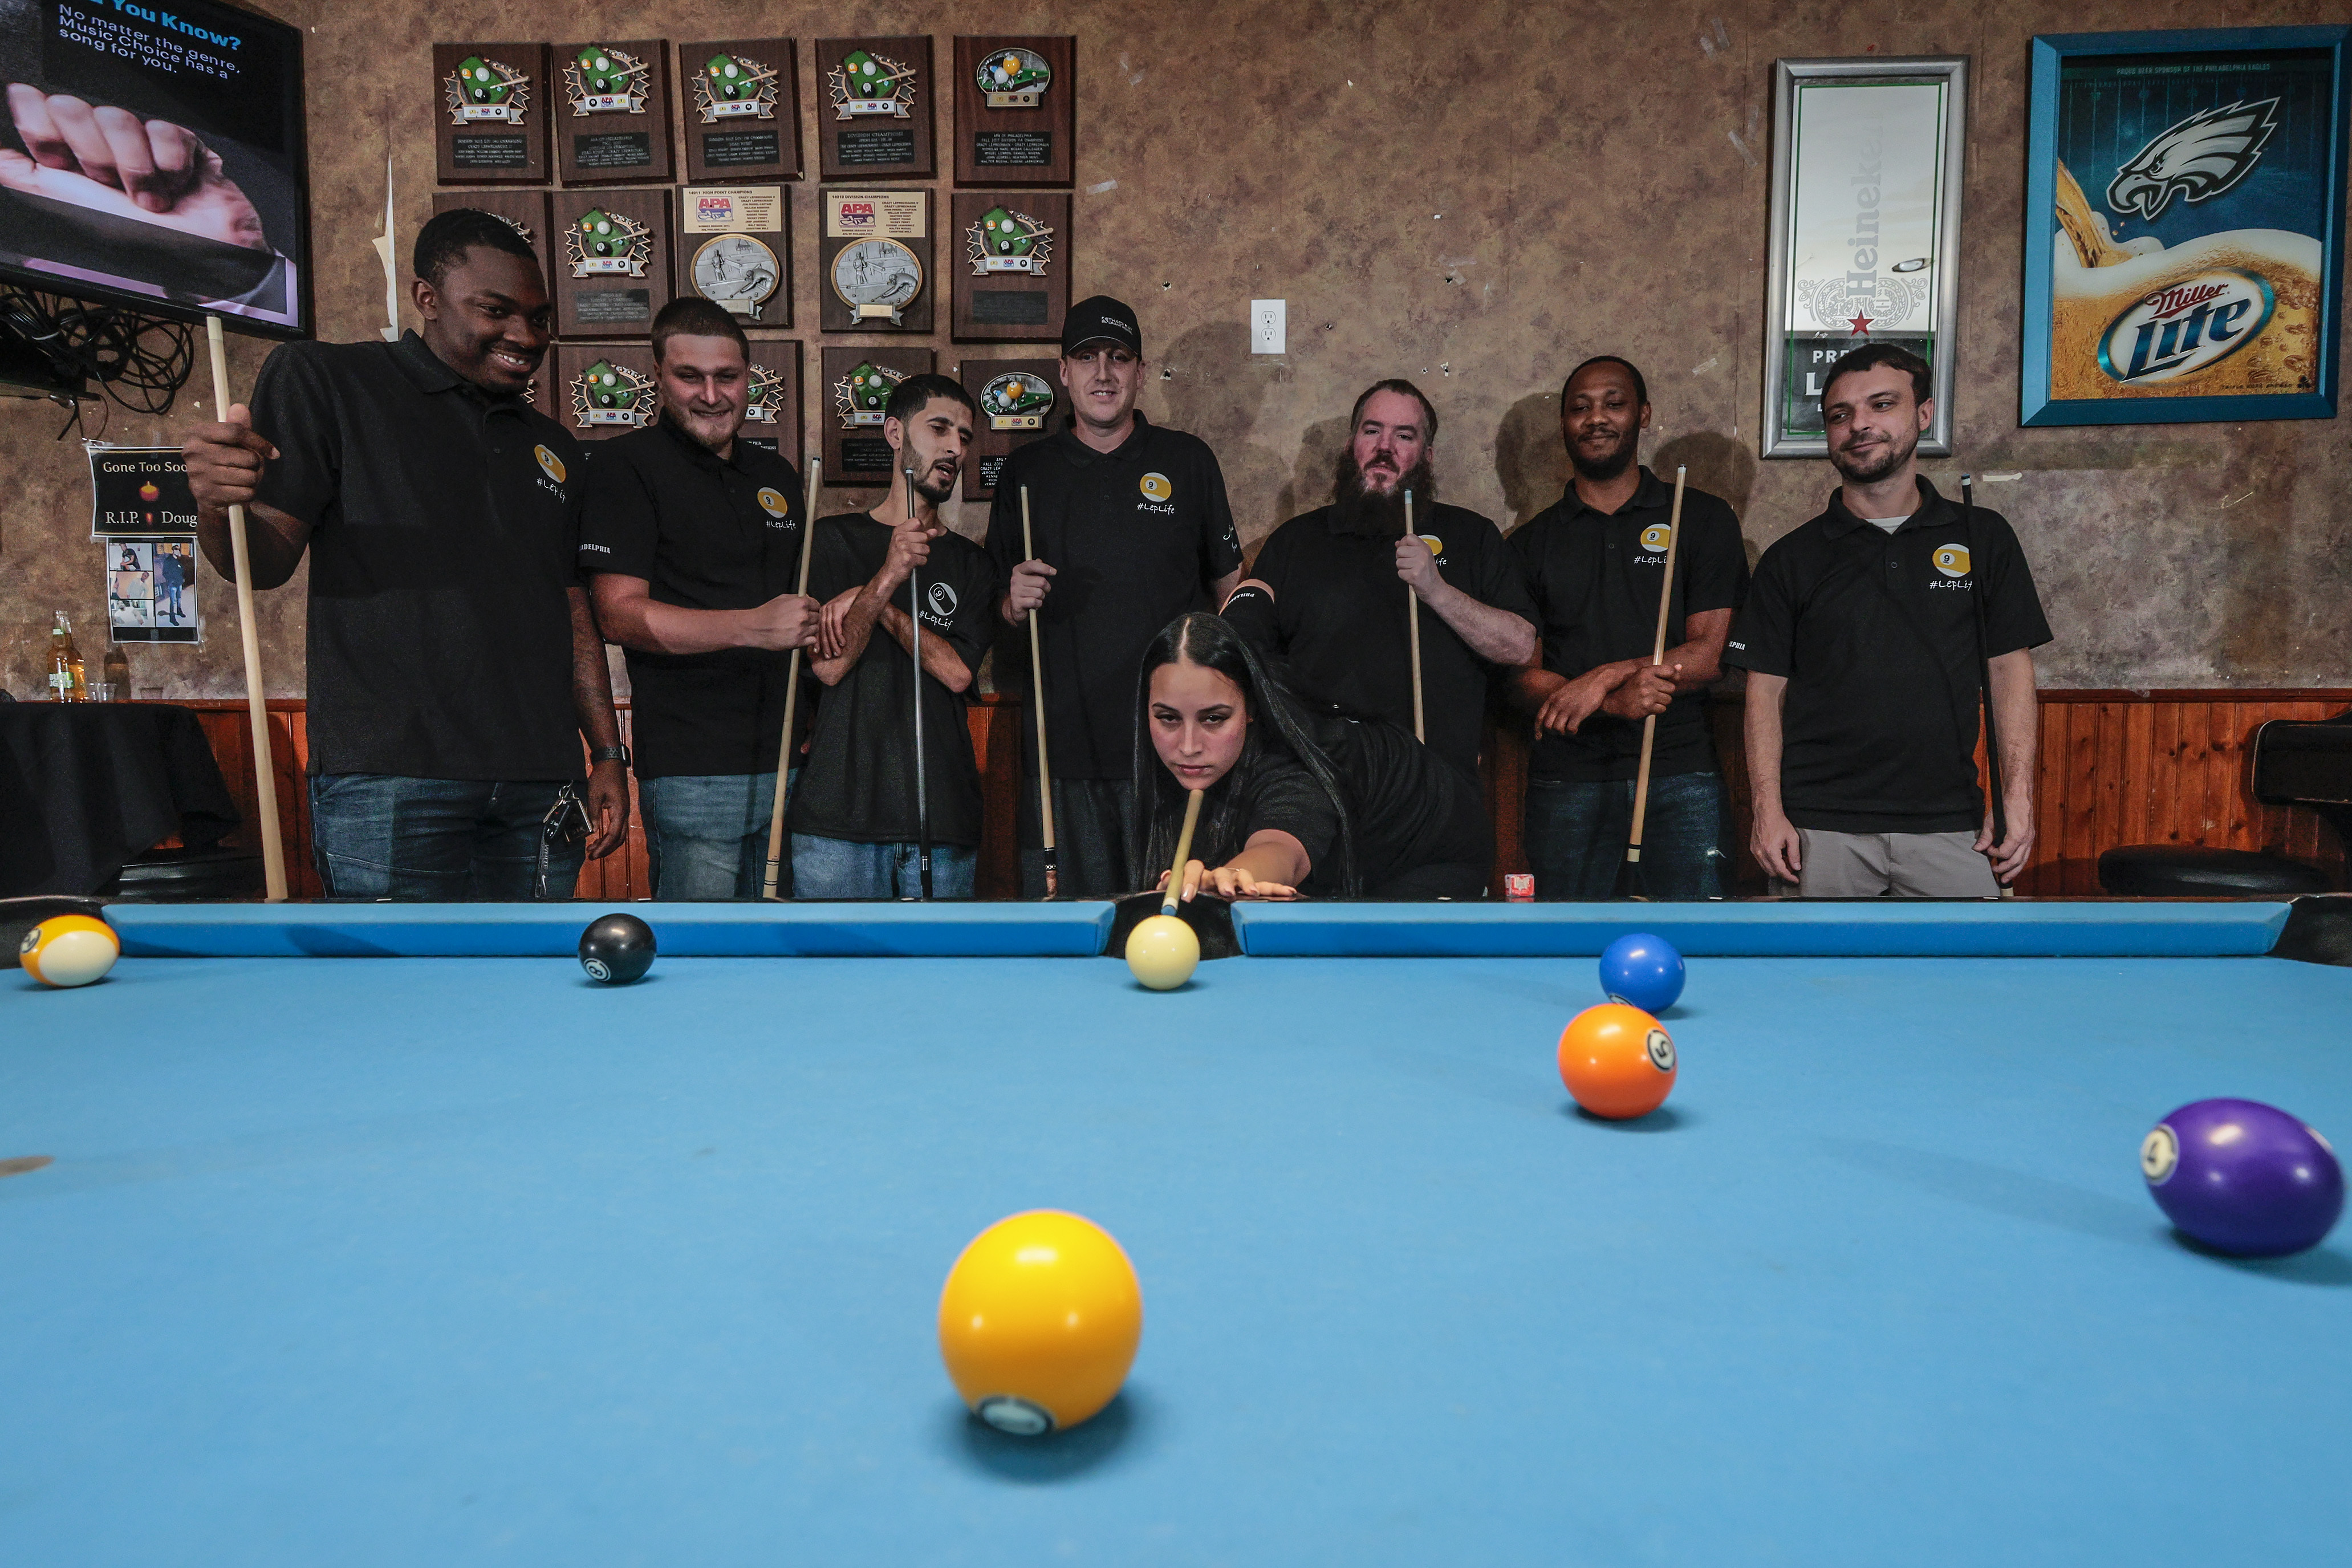 Philly comes in first at the World Pool Championship in Las Vegas photo